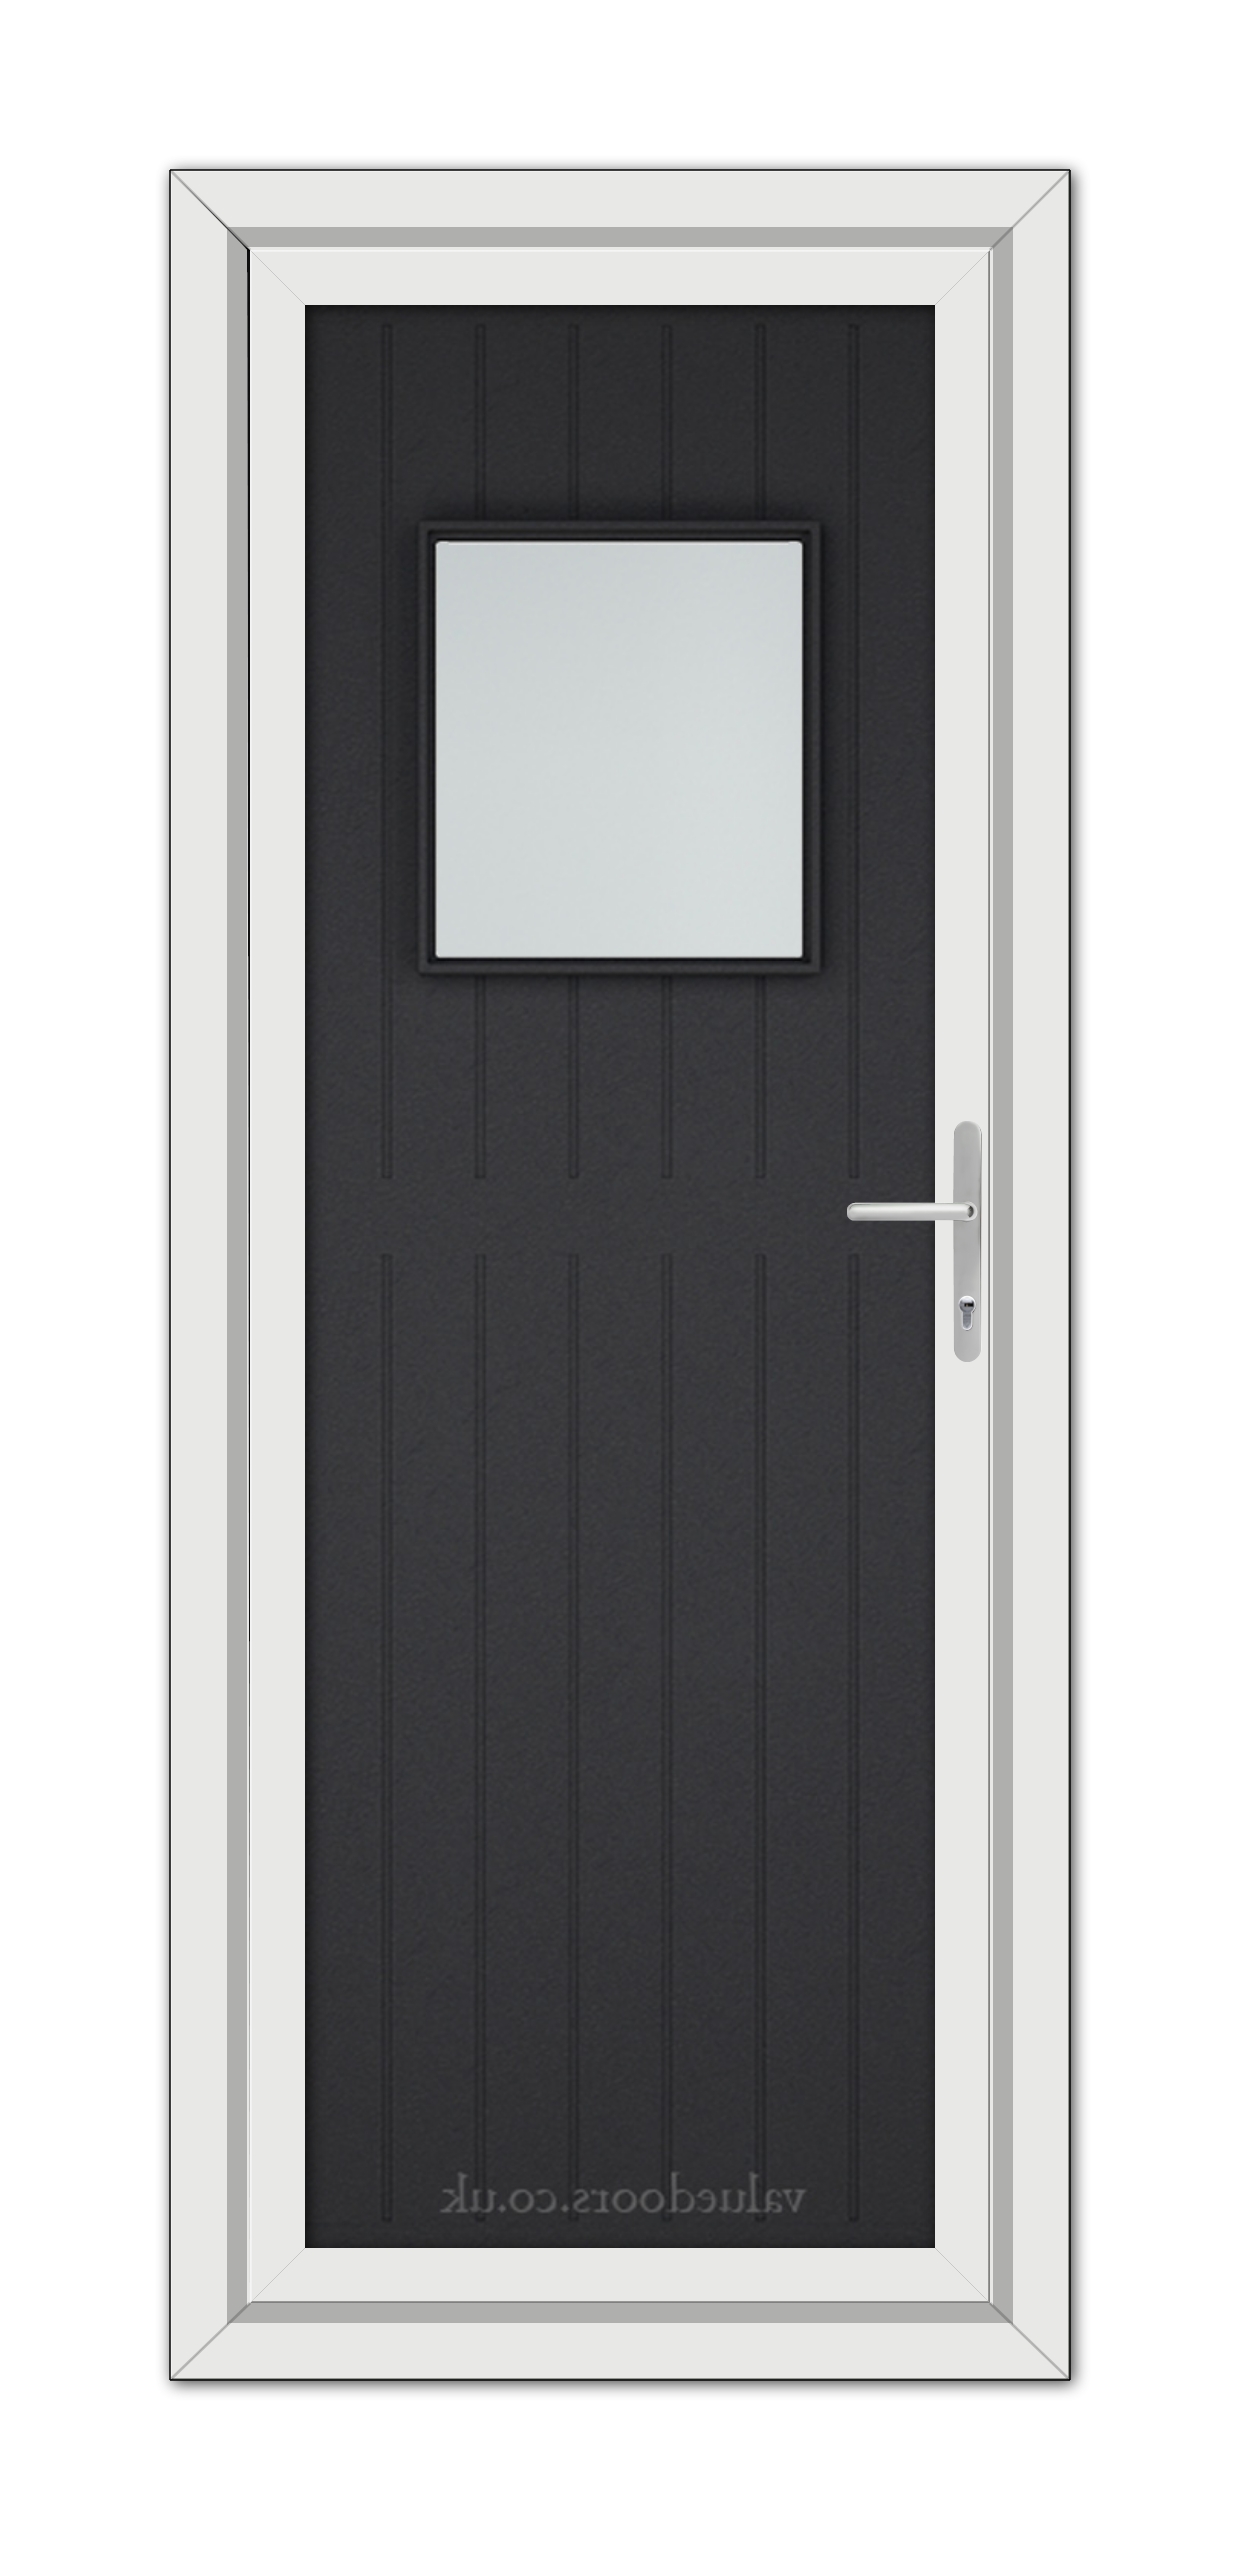 A modern Black Brown Chatsworth uPVC Door with a vertical window and white frame, featuring a metallic handle on the right side.